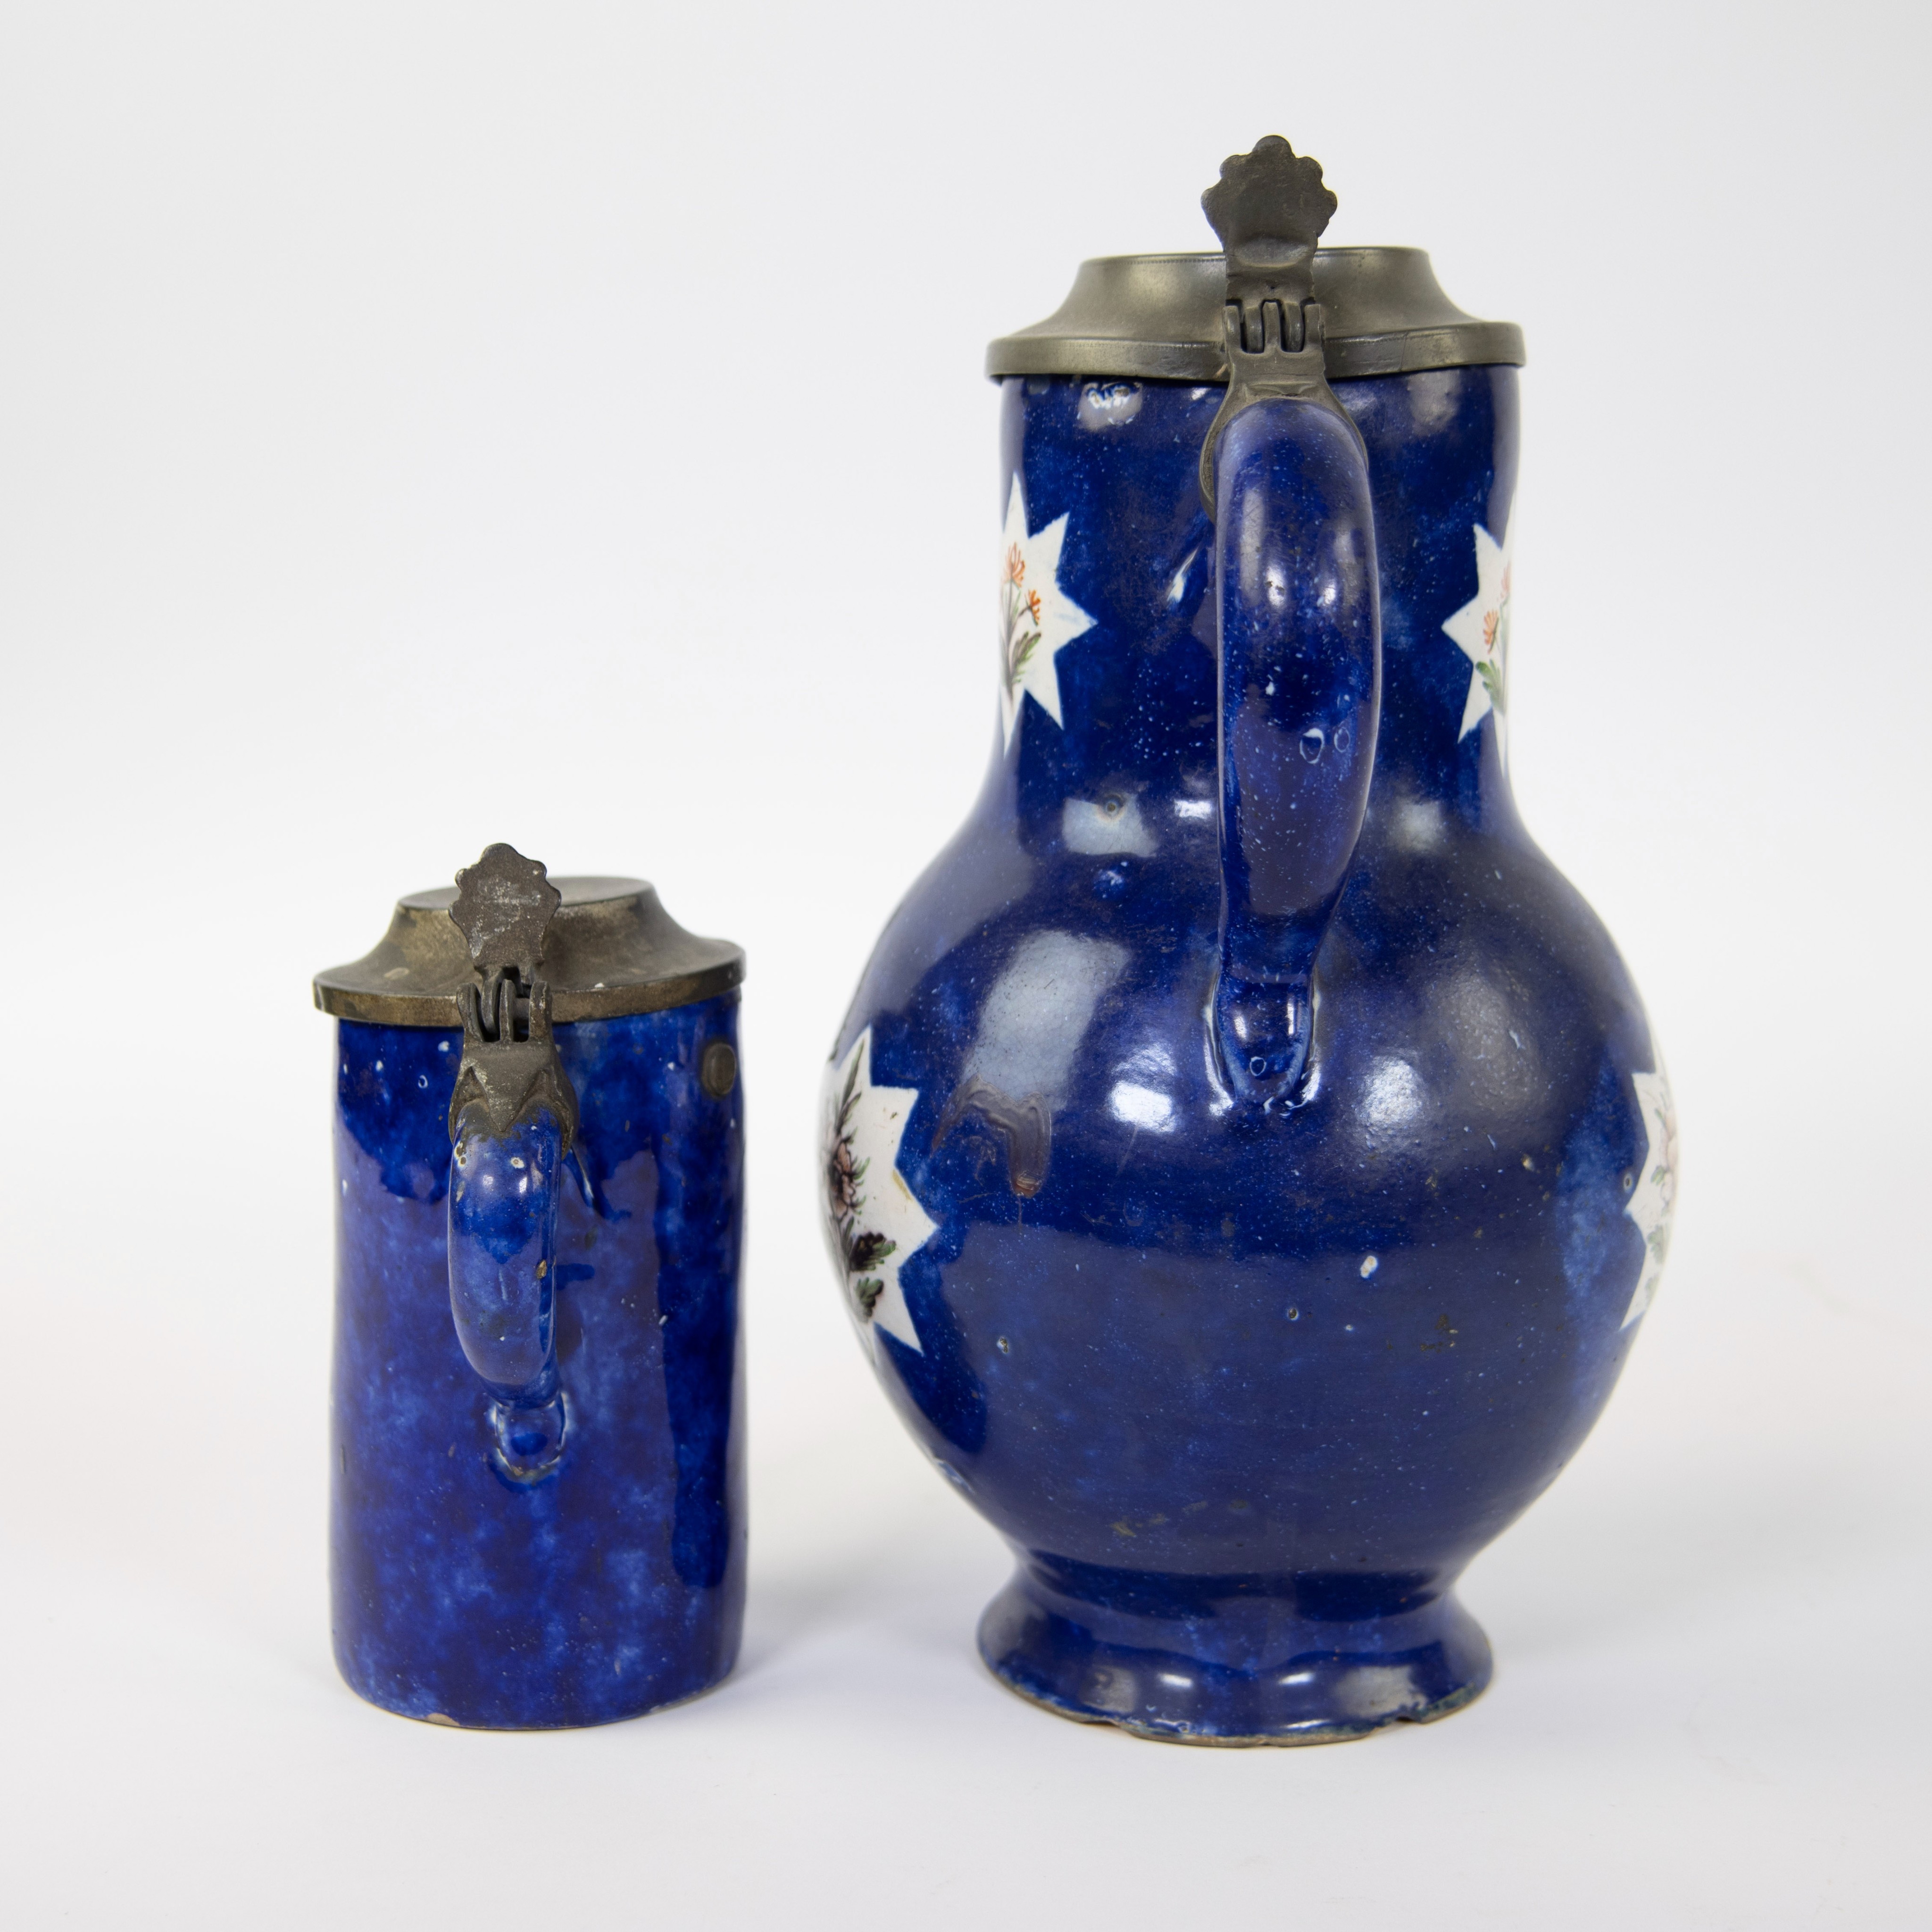 Brussels faience jug and a beer jug with pewter lid, 18th century - Image 3 of 5